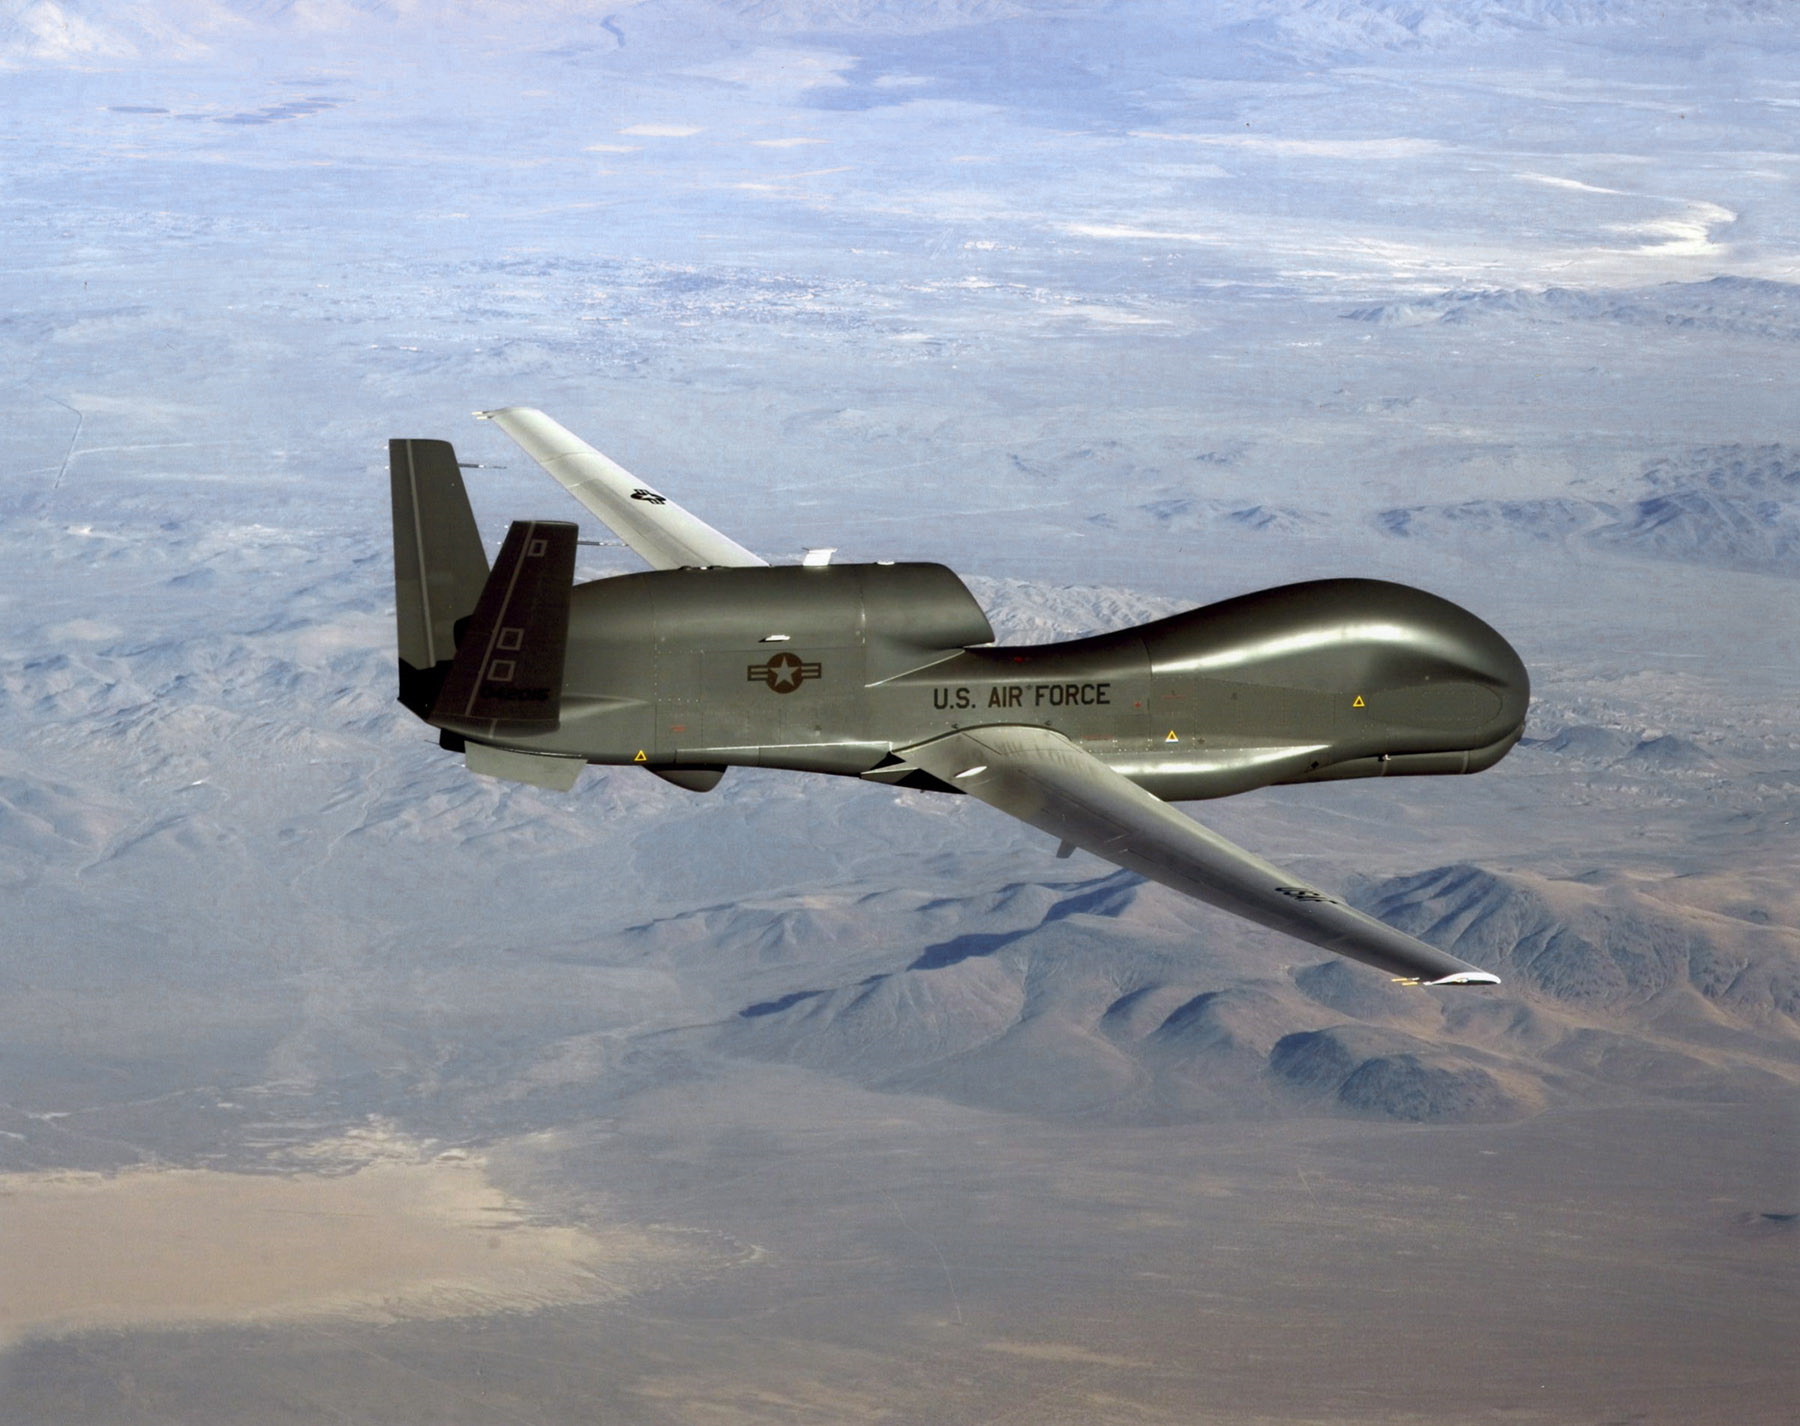 File photo of a RQ-4 Global Hawk unmanned surveillance and reconnaissance aircraft. (U.S. Air Force)